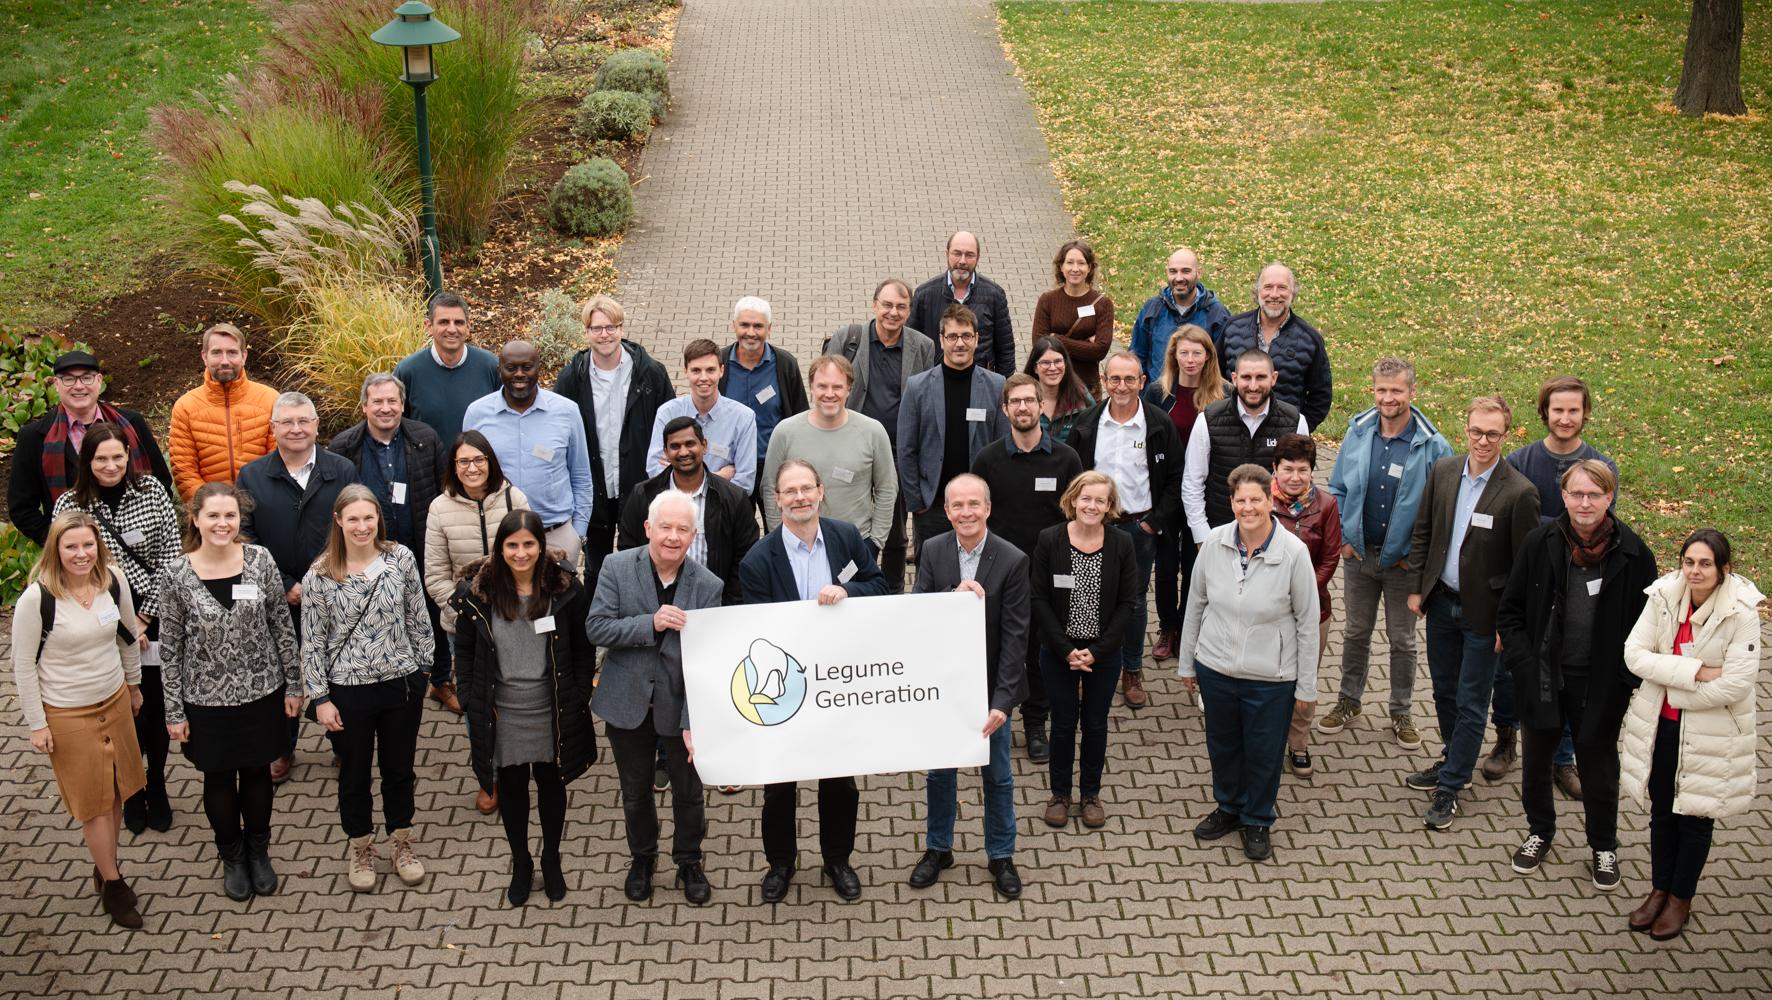 Some members of the new Legume Generation consortium